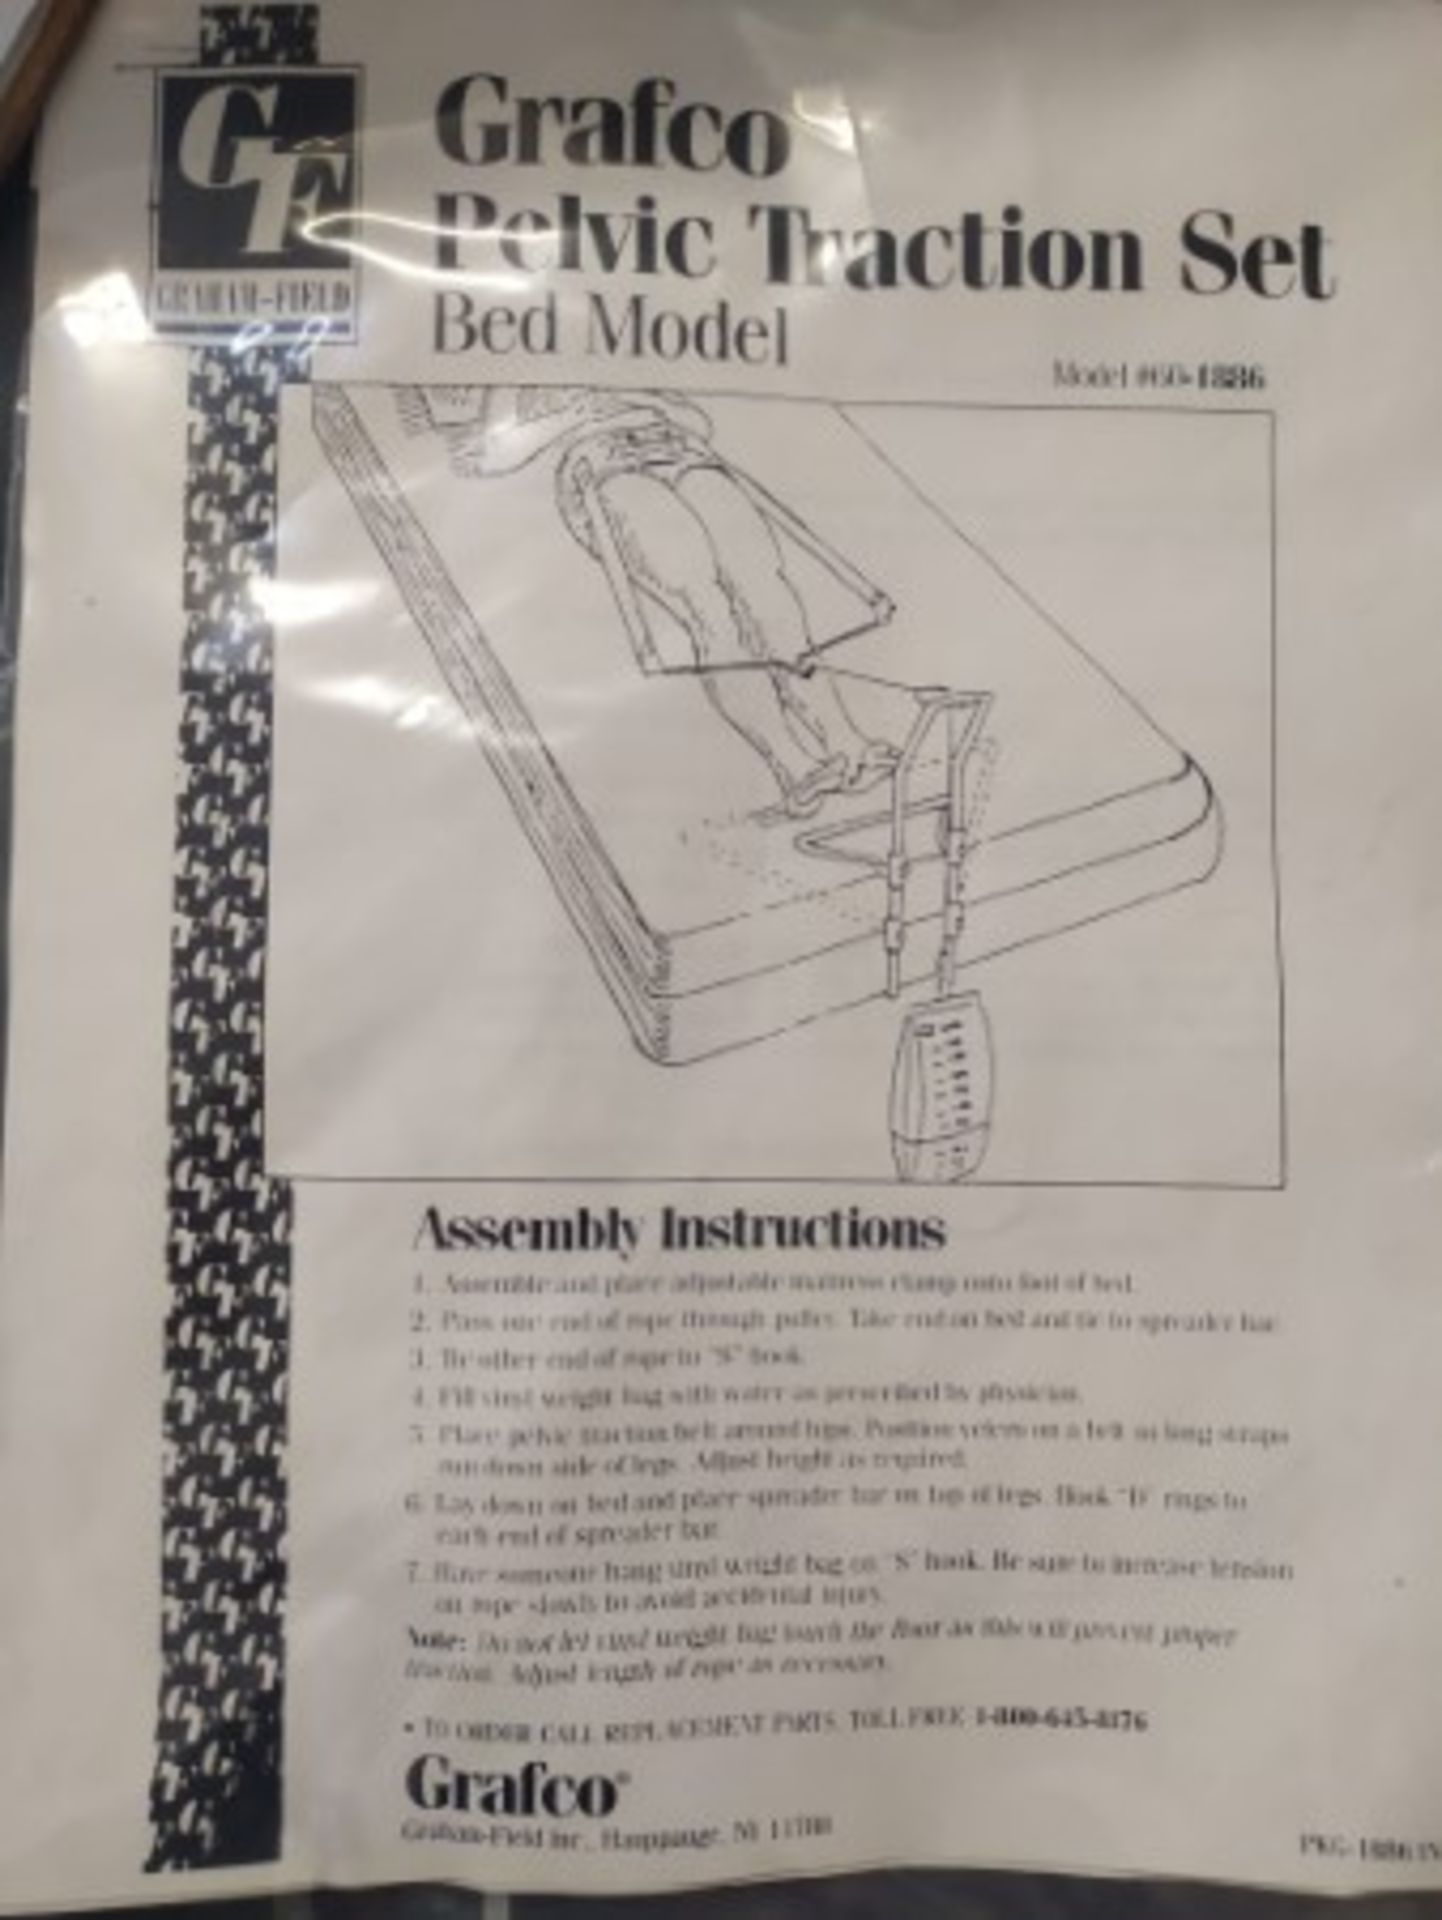 60-1886 BED MODEL PELVIC TRACTION SETS